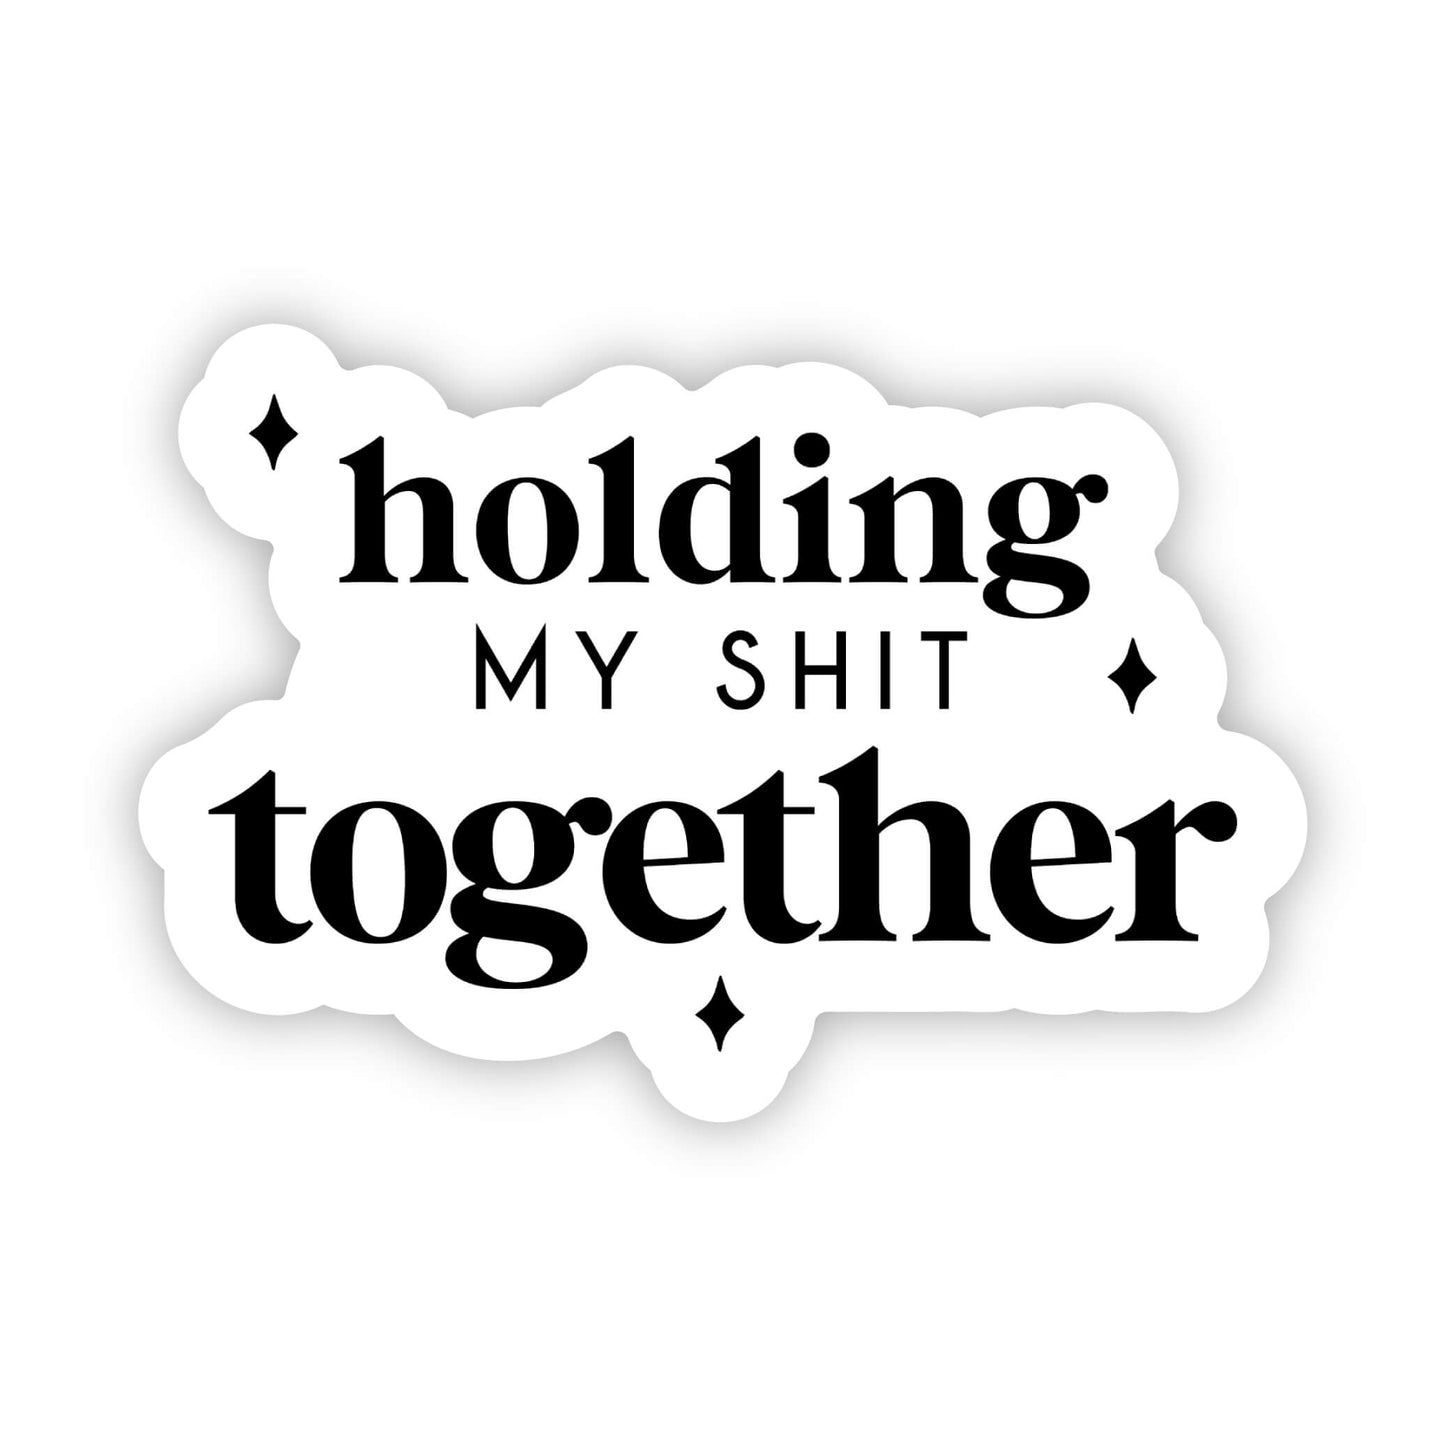 Holding My Shit Together Sticker